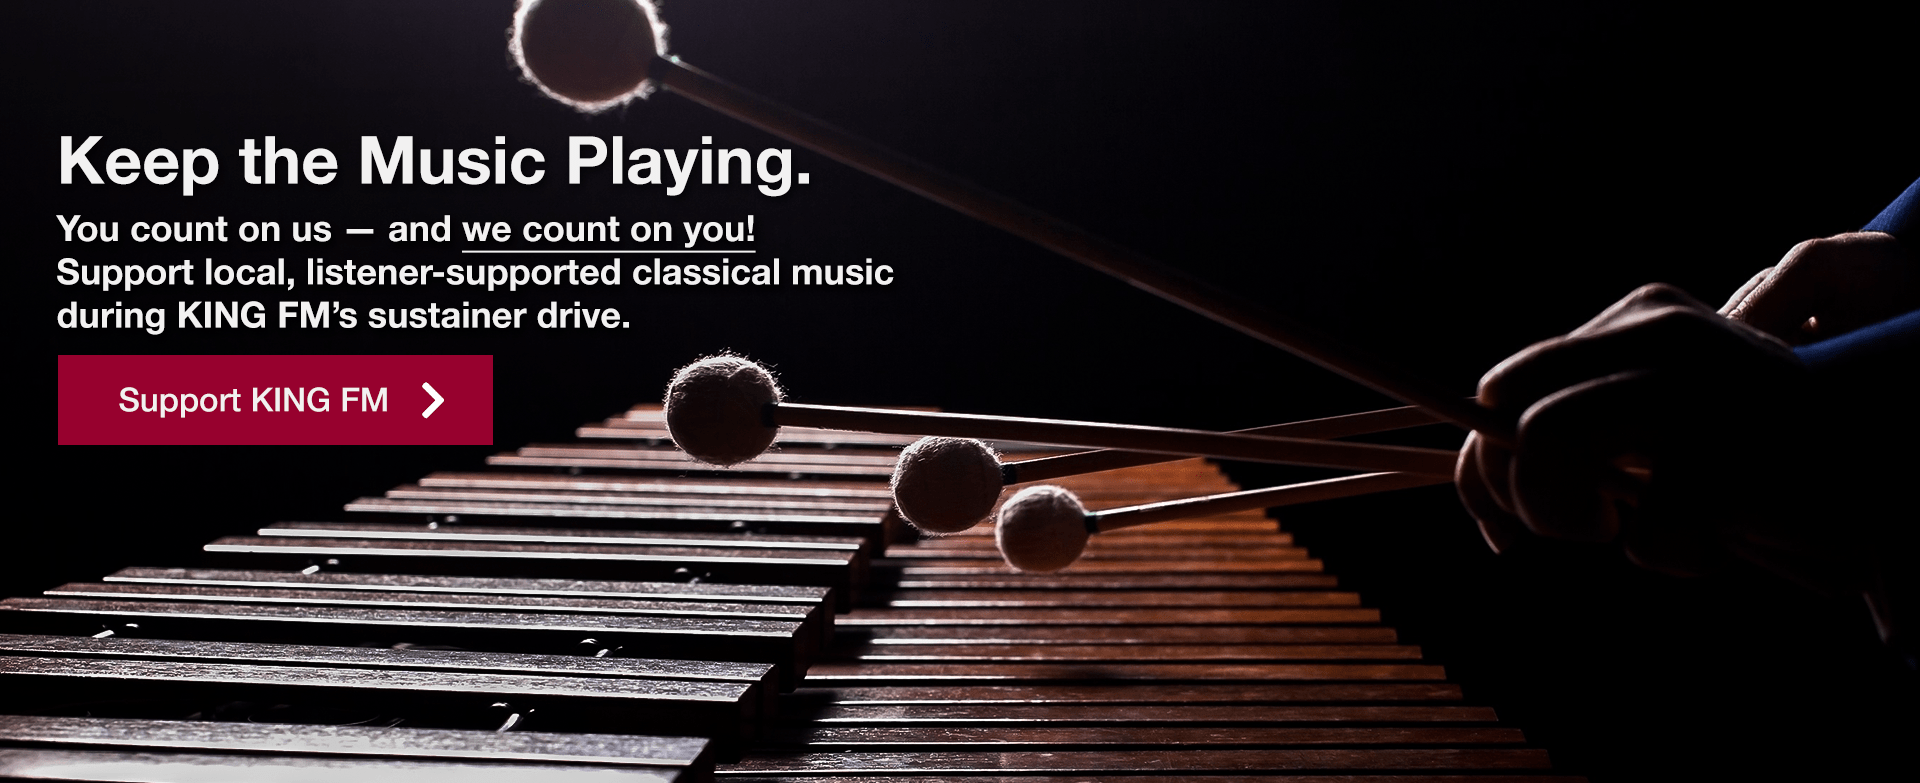 [image of person playing the marimba] Keep the Music Playing. You count on us — and we count on you! Support local, listener-supported classical music during KING FM's sustainer drive. | Support KING FM »